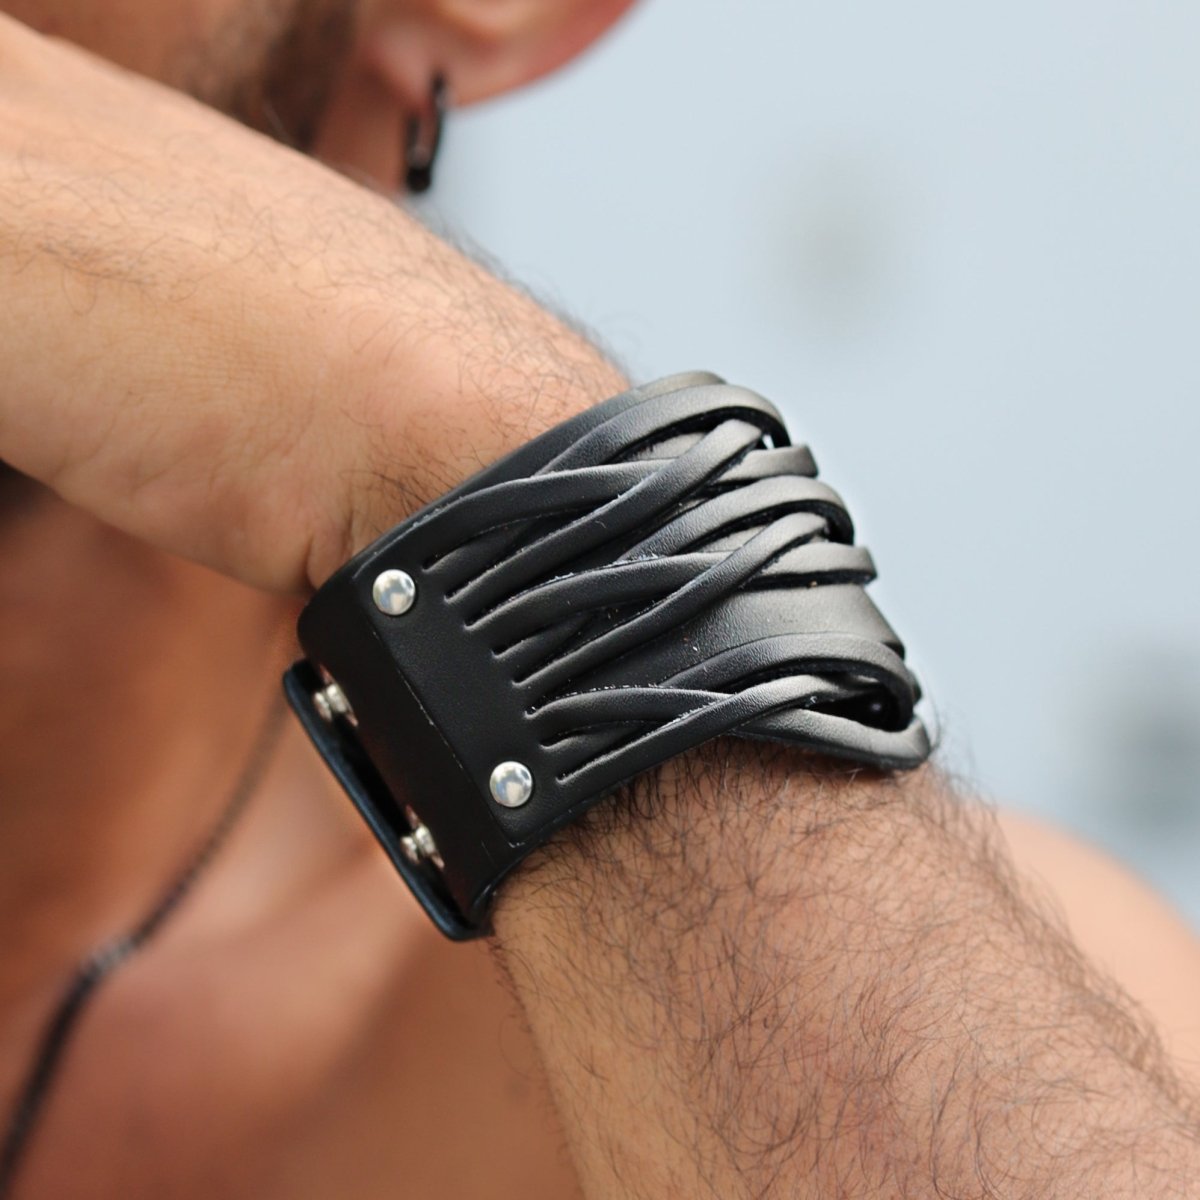 BERML BY DESIGN JEWELRY FOR MEN